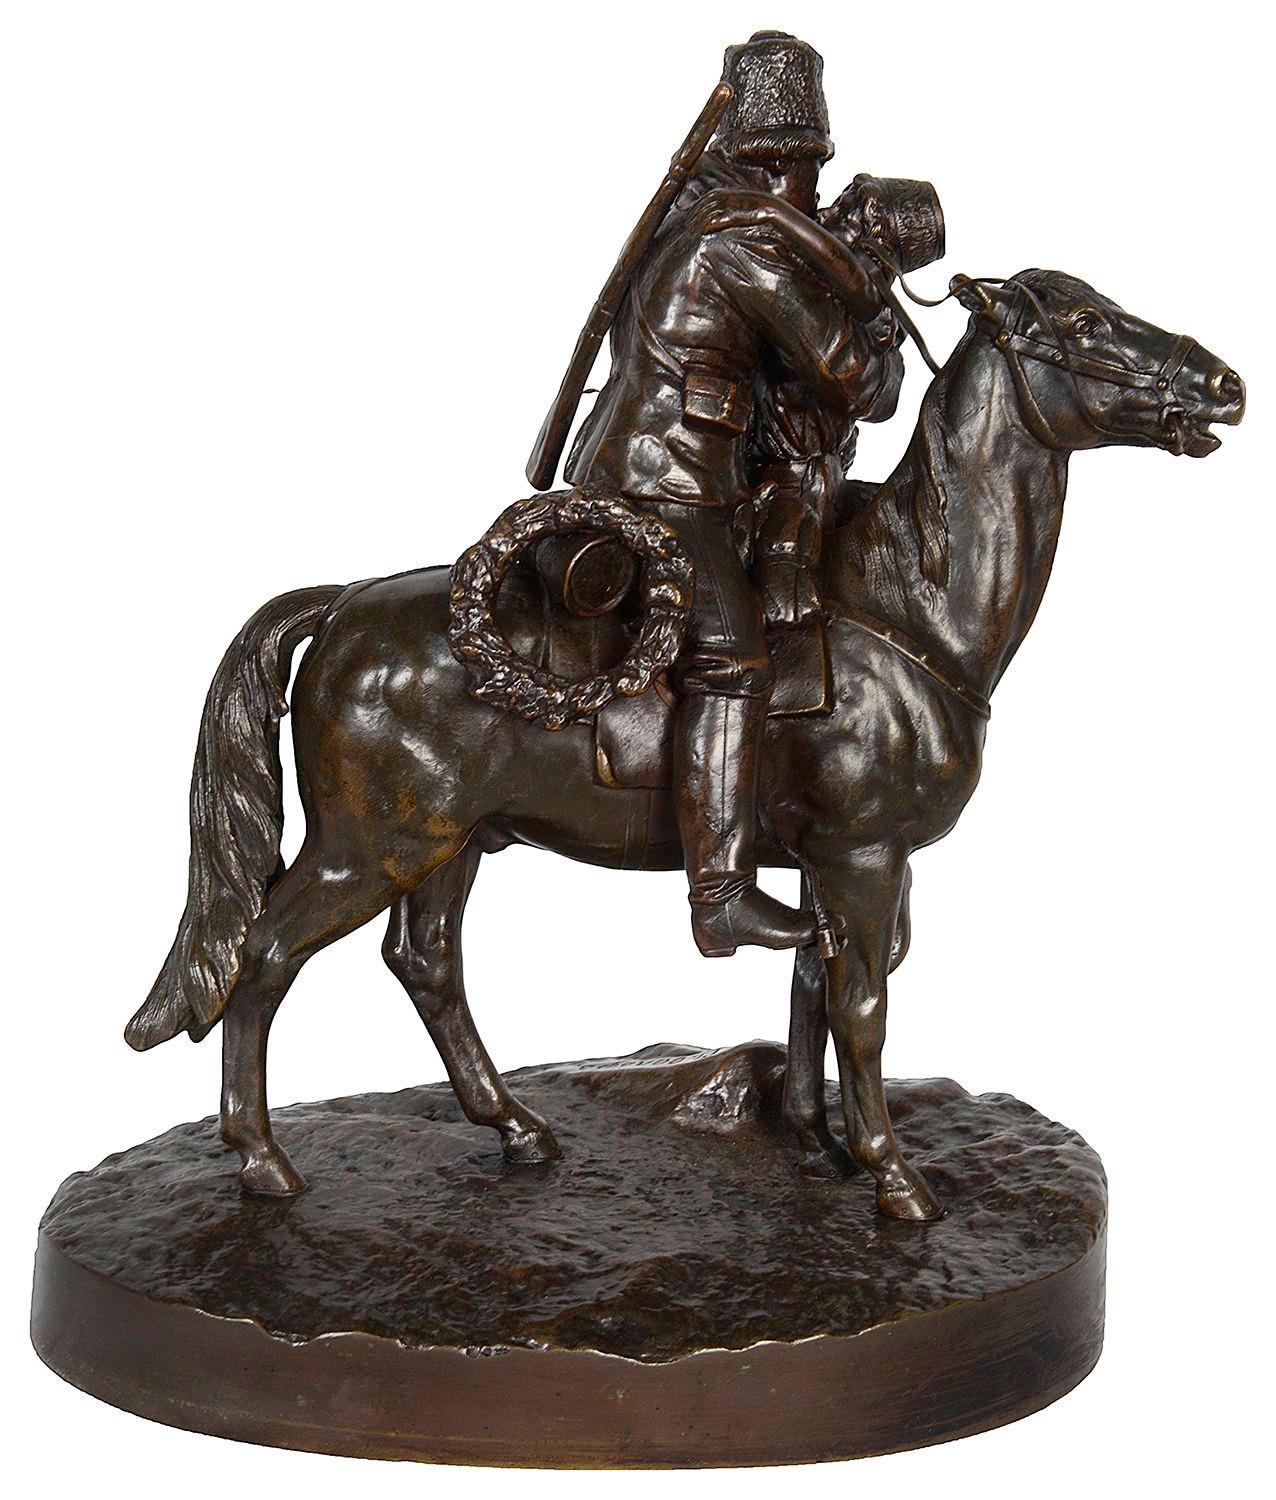 Bronze 19th Century Russian bronze group of lovers on horse back. For Sale